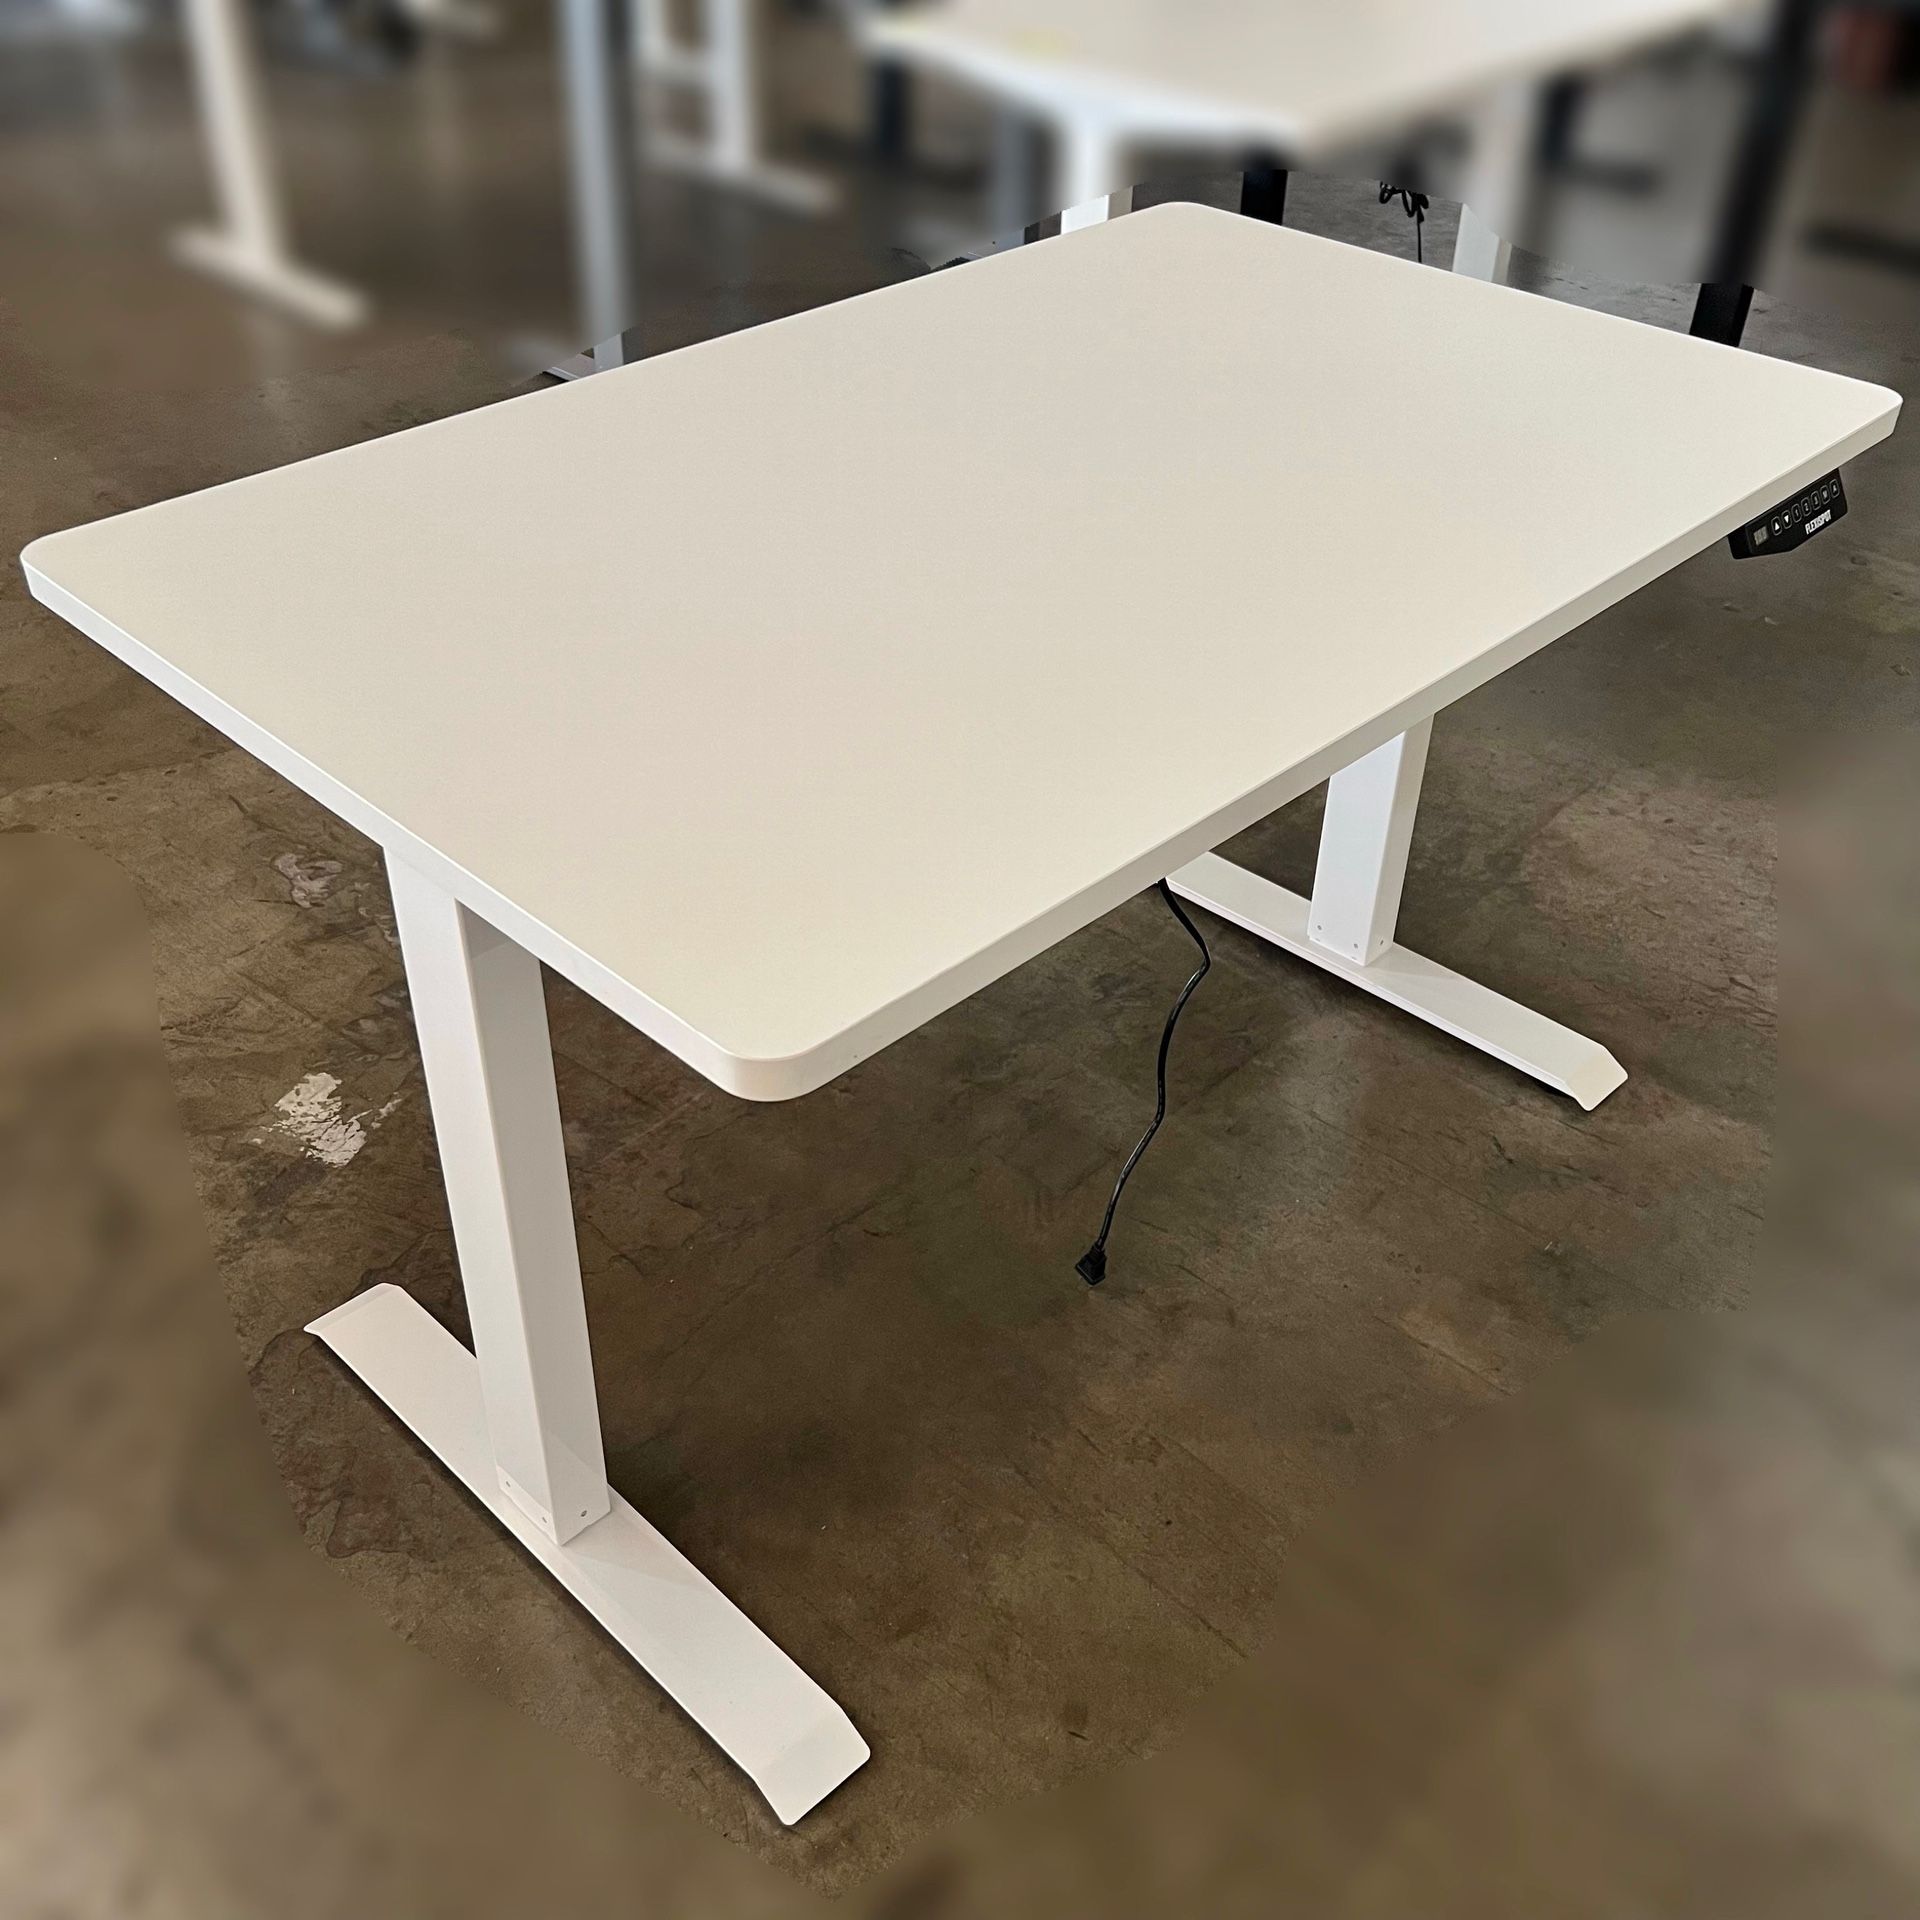 48”x30” White ELECTRIC Standing Desk, Sit and Stand Up Desk, Office Desk, Computer Desk